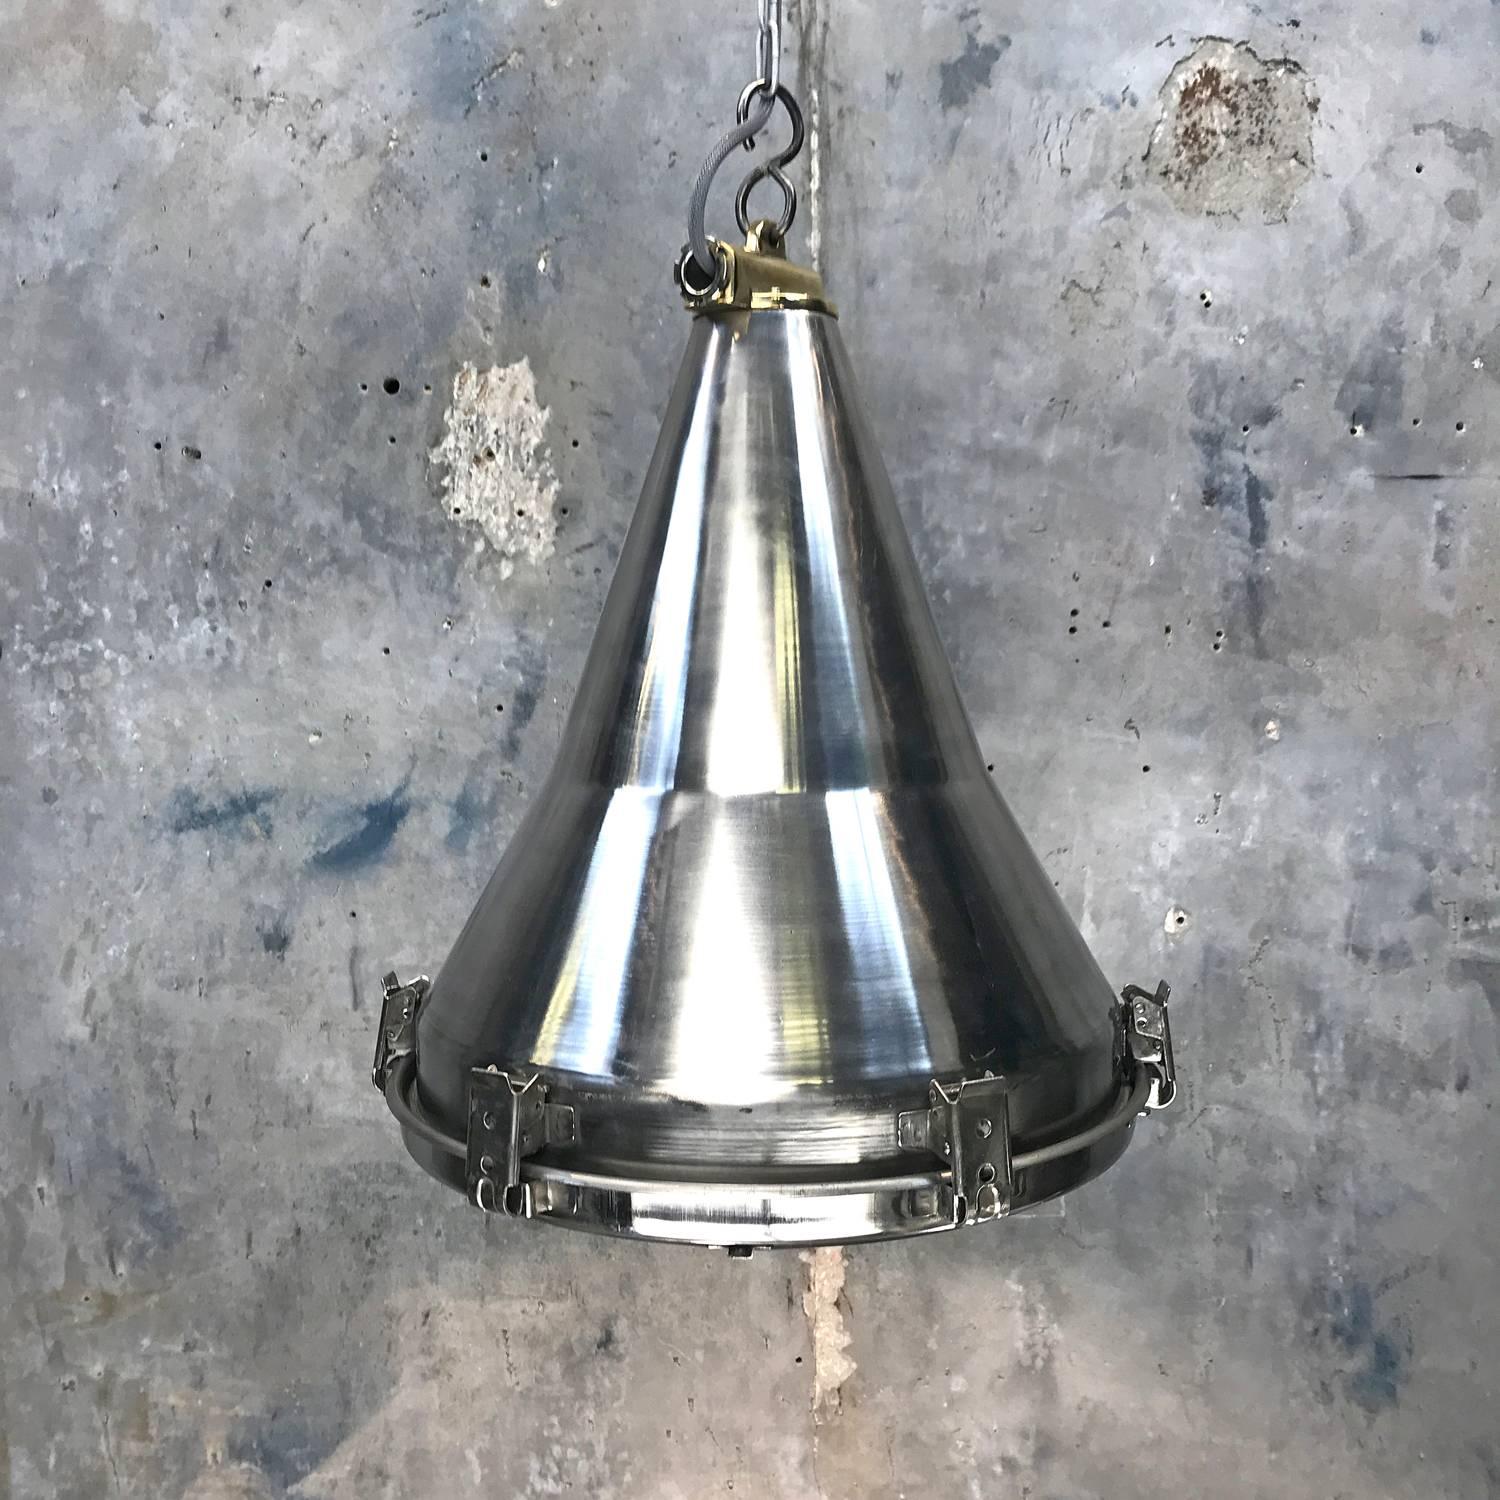 Late Century Korean Stainless Steel, Brass and Glass Conical Flood Light Pendant 7